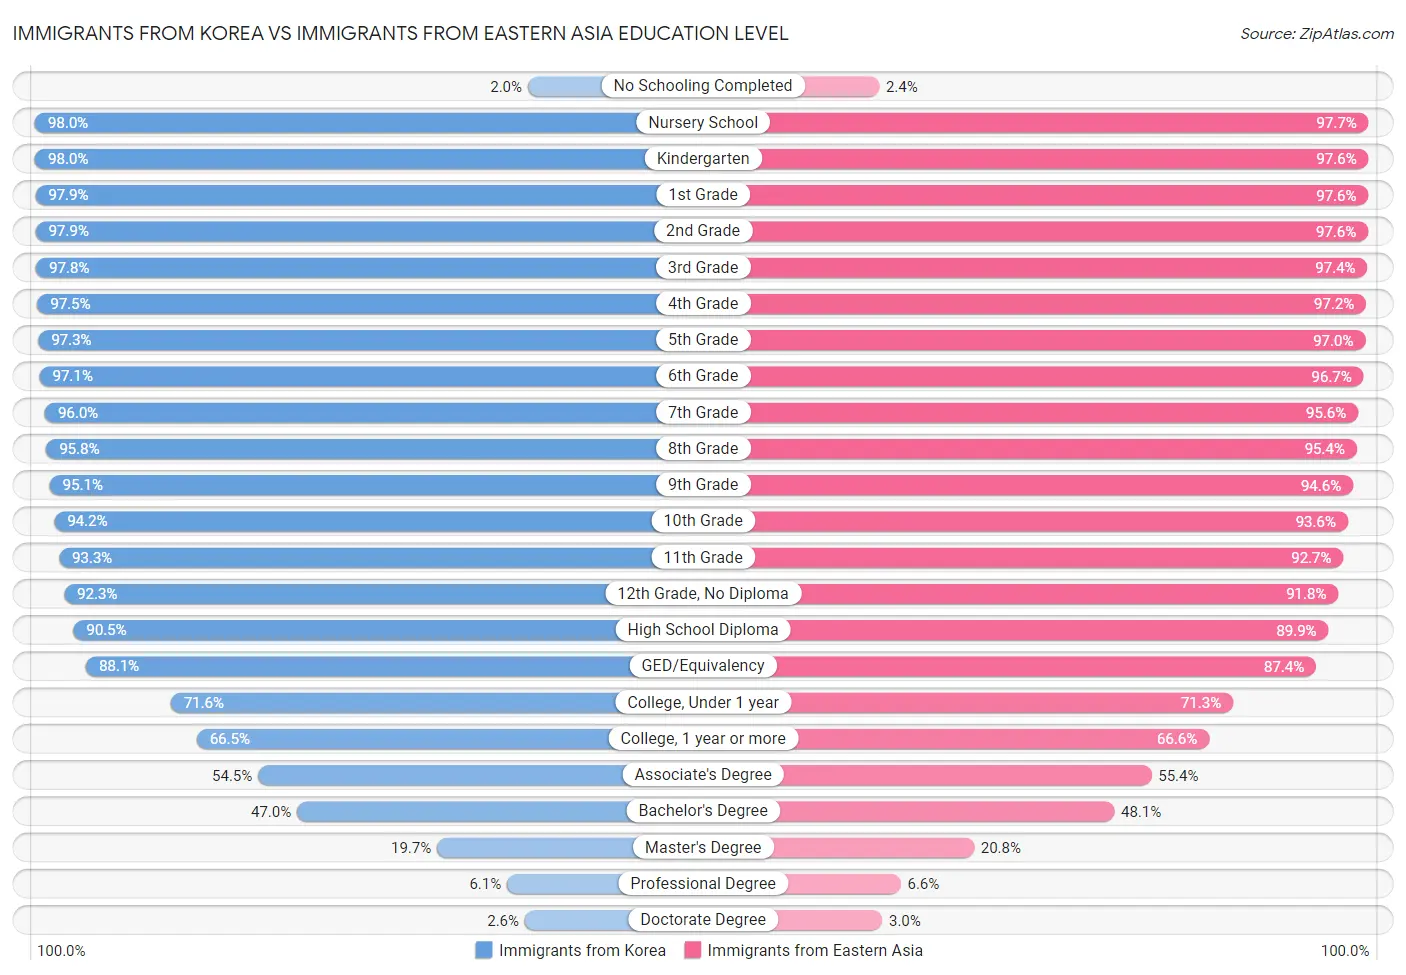 Immigrants from Korea vs Immigrants from Eastern Asia Education Level